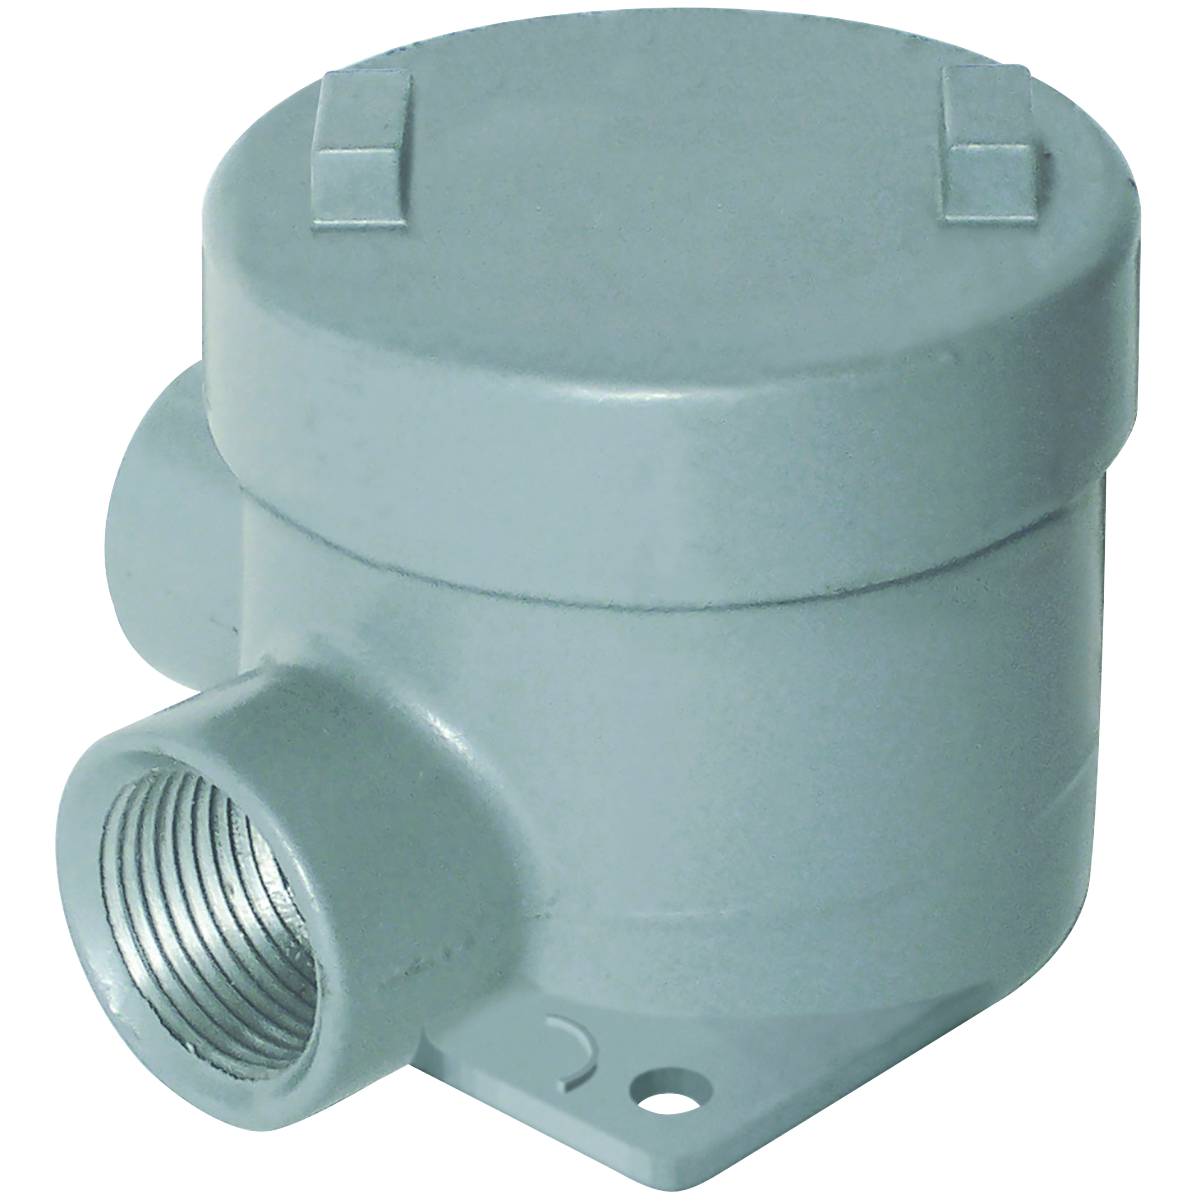 GEB SERIES - ALUMINUM OUTLET BODY - L TYPE - HUB SIZE 1-1/2 INCH -VOLUME 29.0 CUBIC INCHES